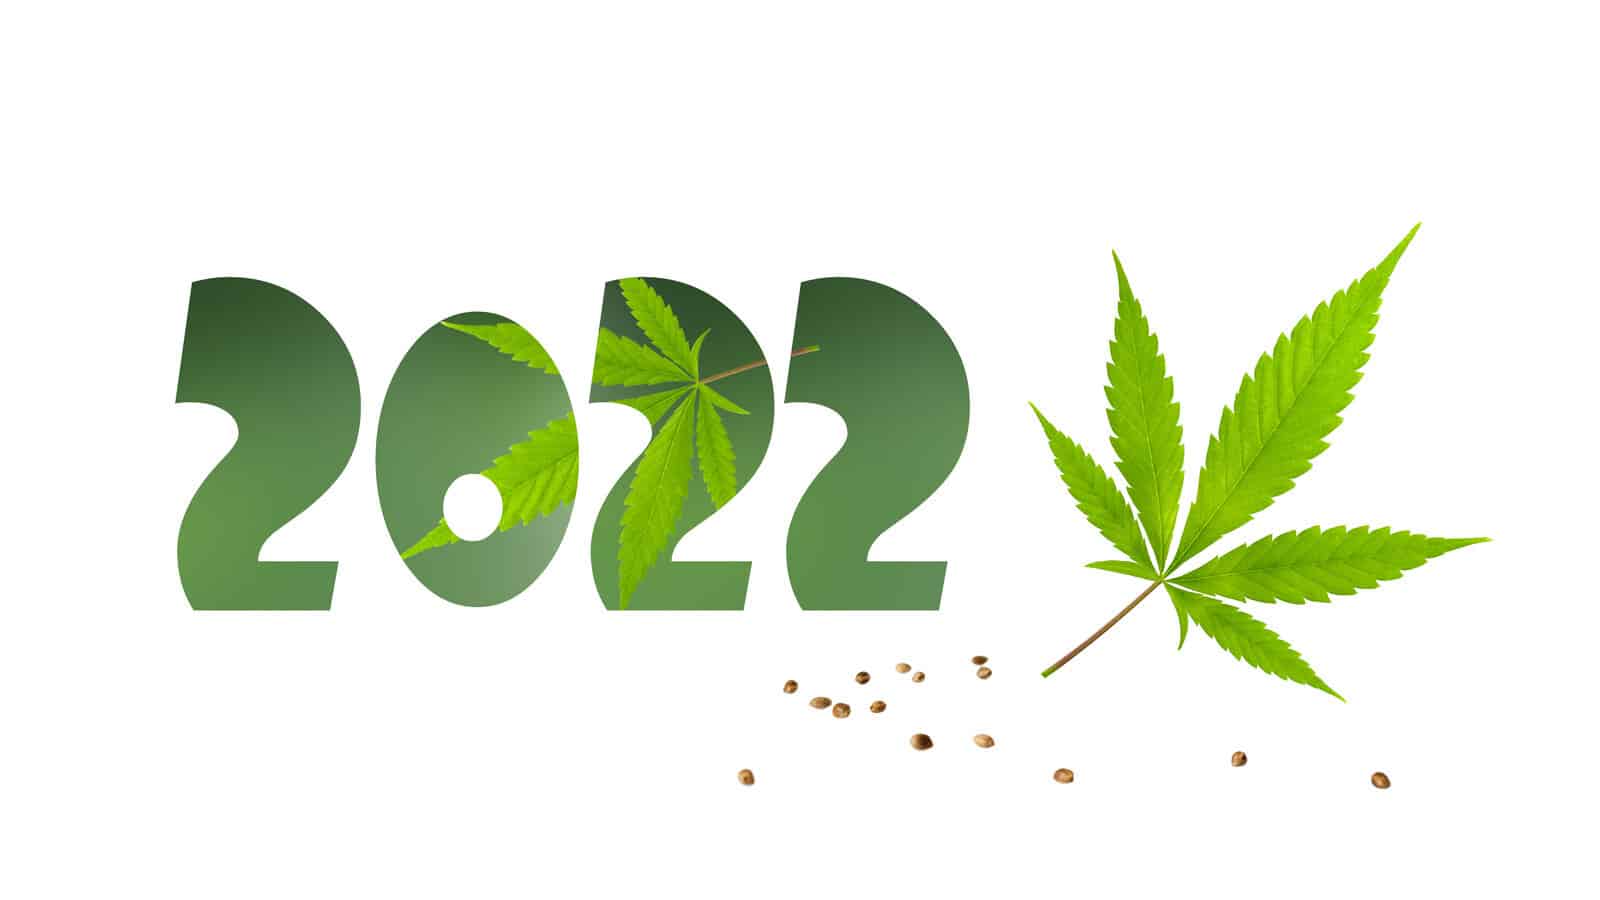 2022 in green with cannabis leaf isolated on white, cannabis industry trends in 2022